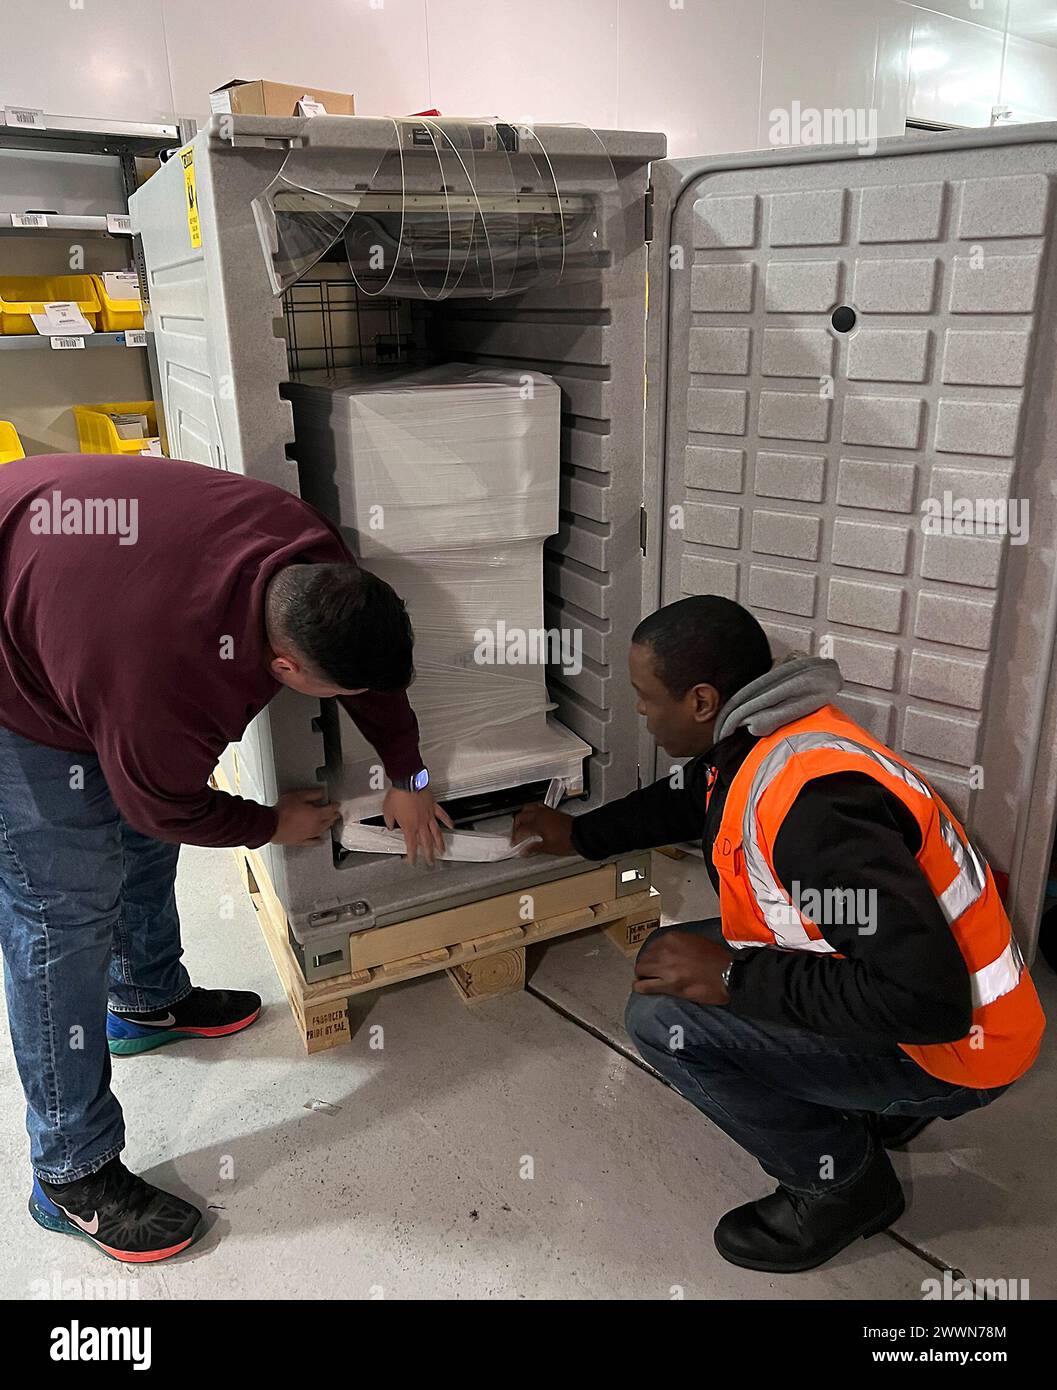 Workers at the U.S. Army Medical Materiel Center-Europe load a shipment of refrigerated medical items into a new cold-chain management container designed to hold temperatures between 2 and 8 degrees Celsius. The rugged, battery-powered units feature a self-regulated refrigeration system that can hold temperatures for 48 hours or more, ensuring medications, vaccines and other medical supplies reach their destination ready to be used. Stock Photo